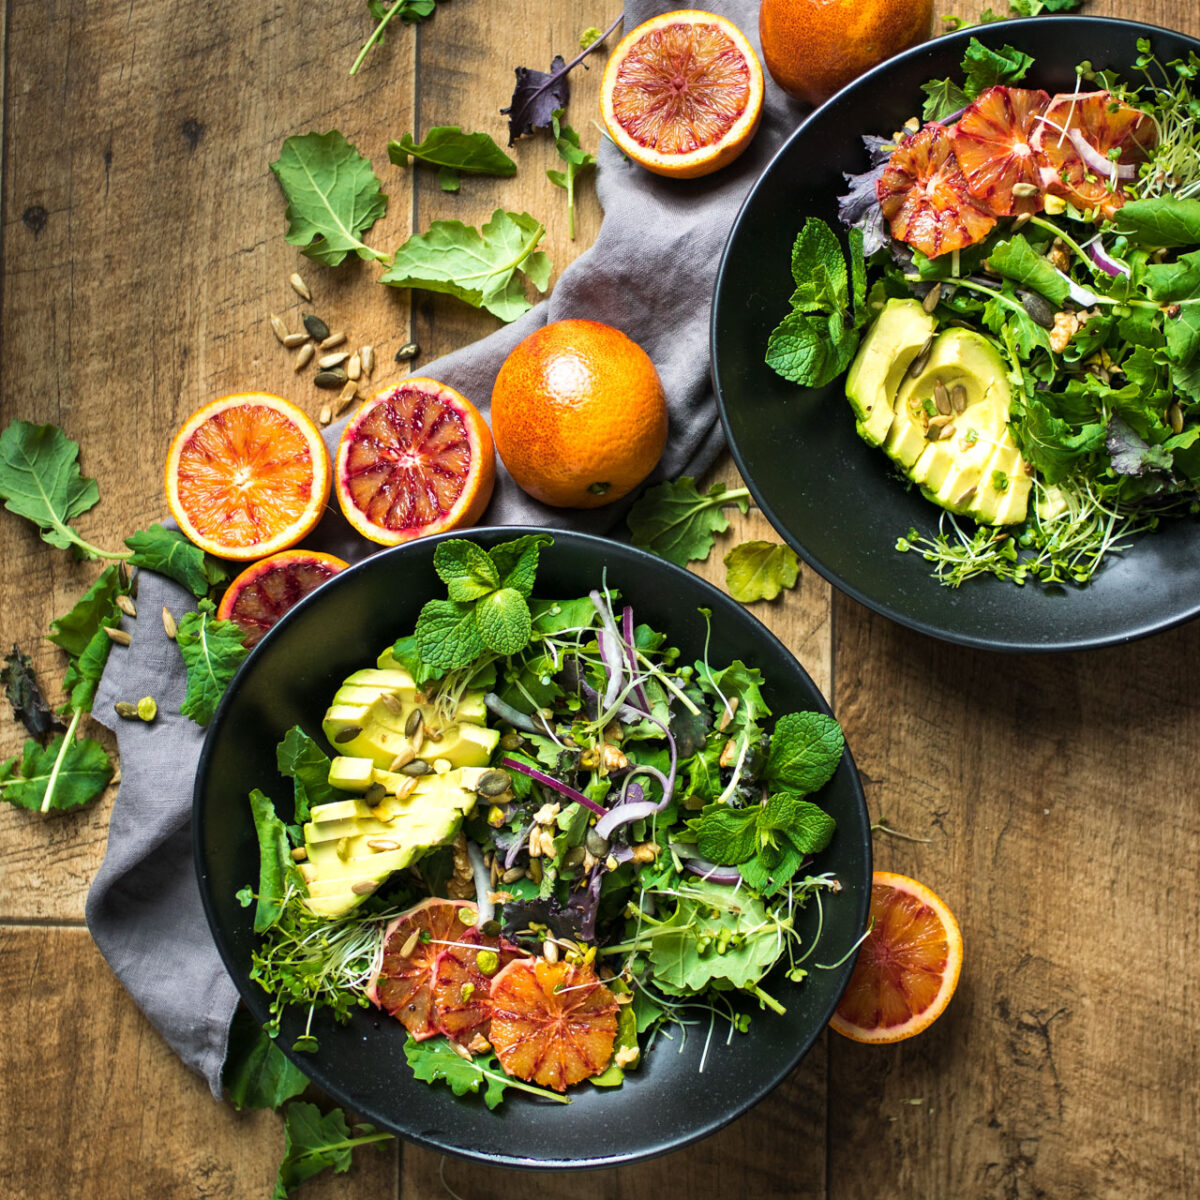 A delicious, winter salad featuring blood oranges and balsamic vinegar